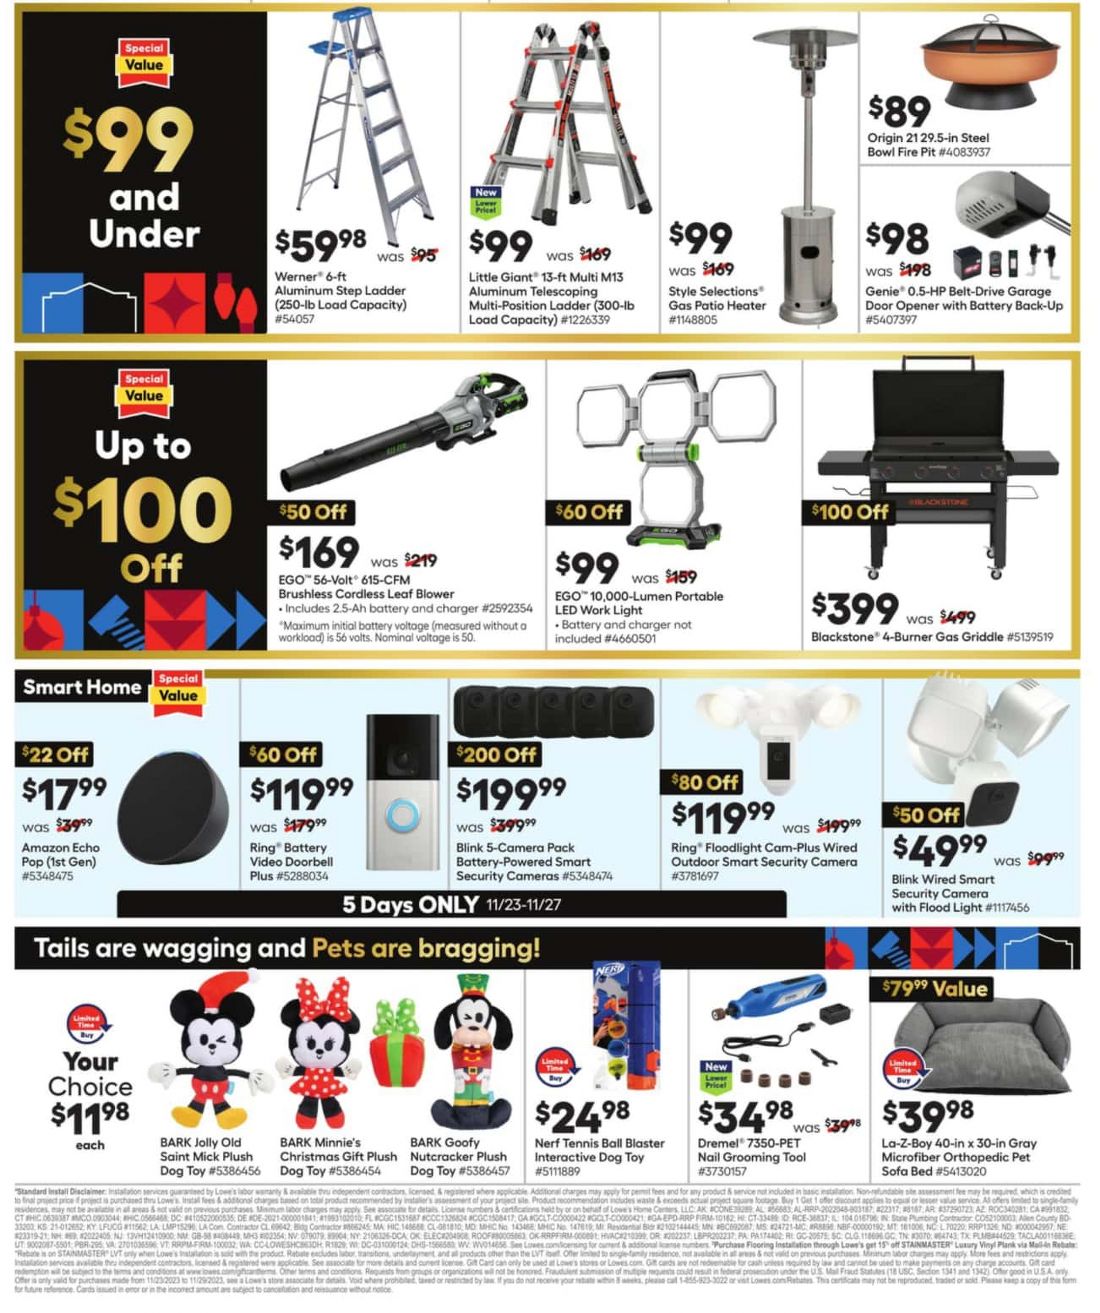 Lowe's Black Friday July 2024 Weekly Sales, Deals, Discounts and Digital Coupons.